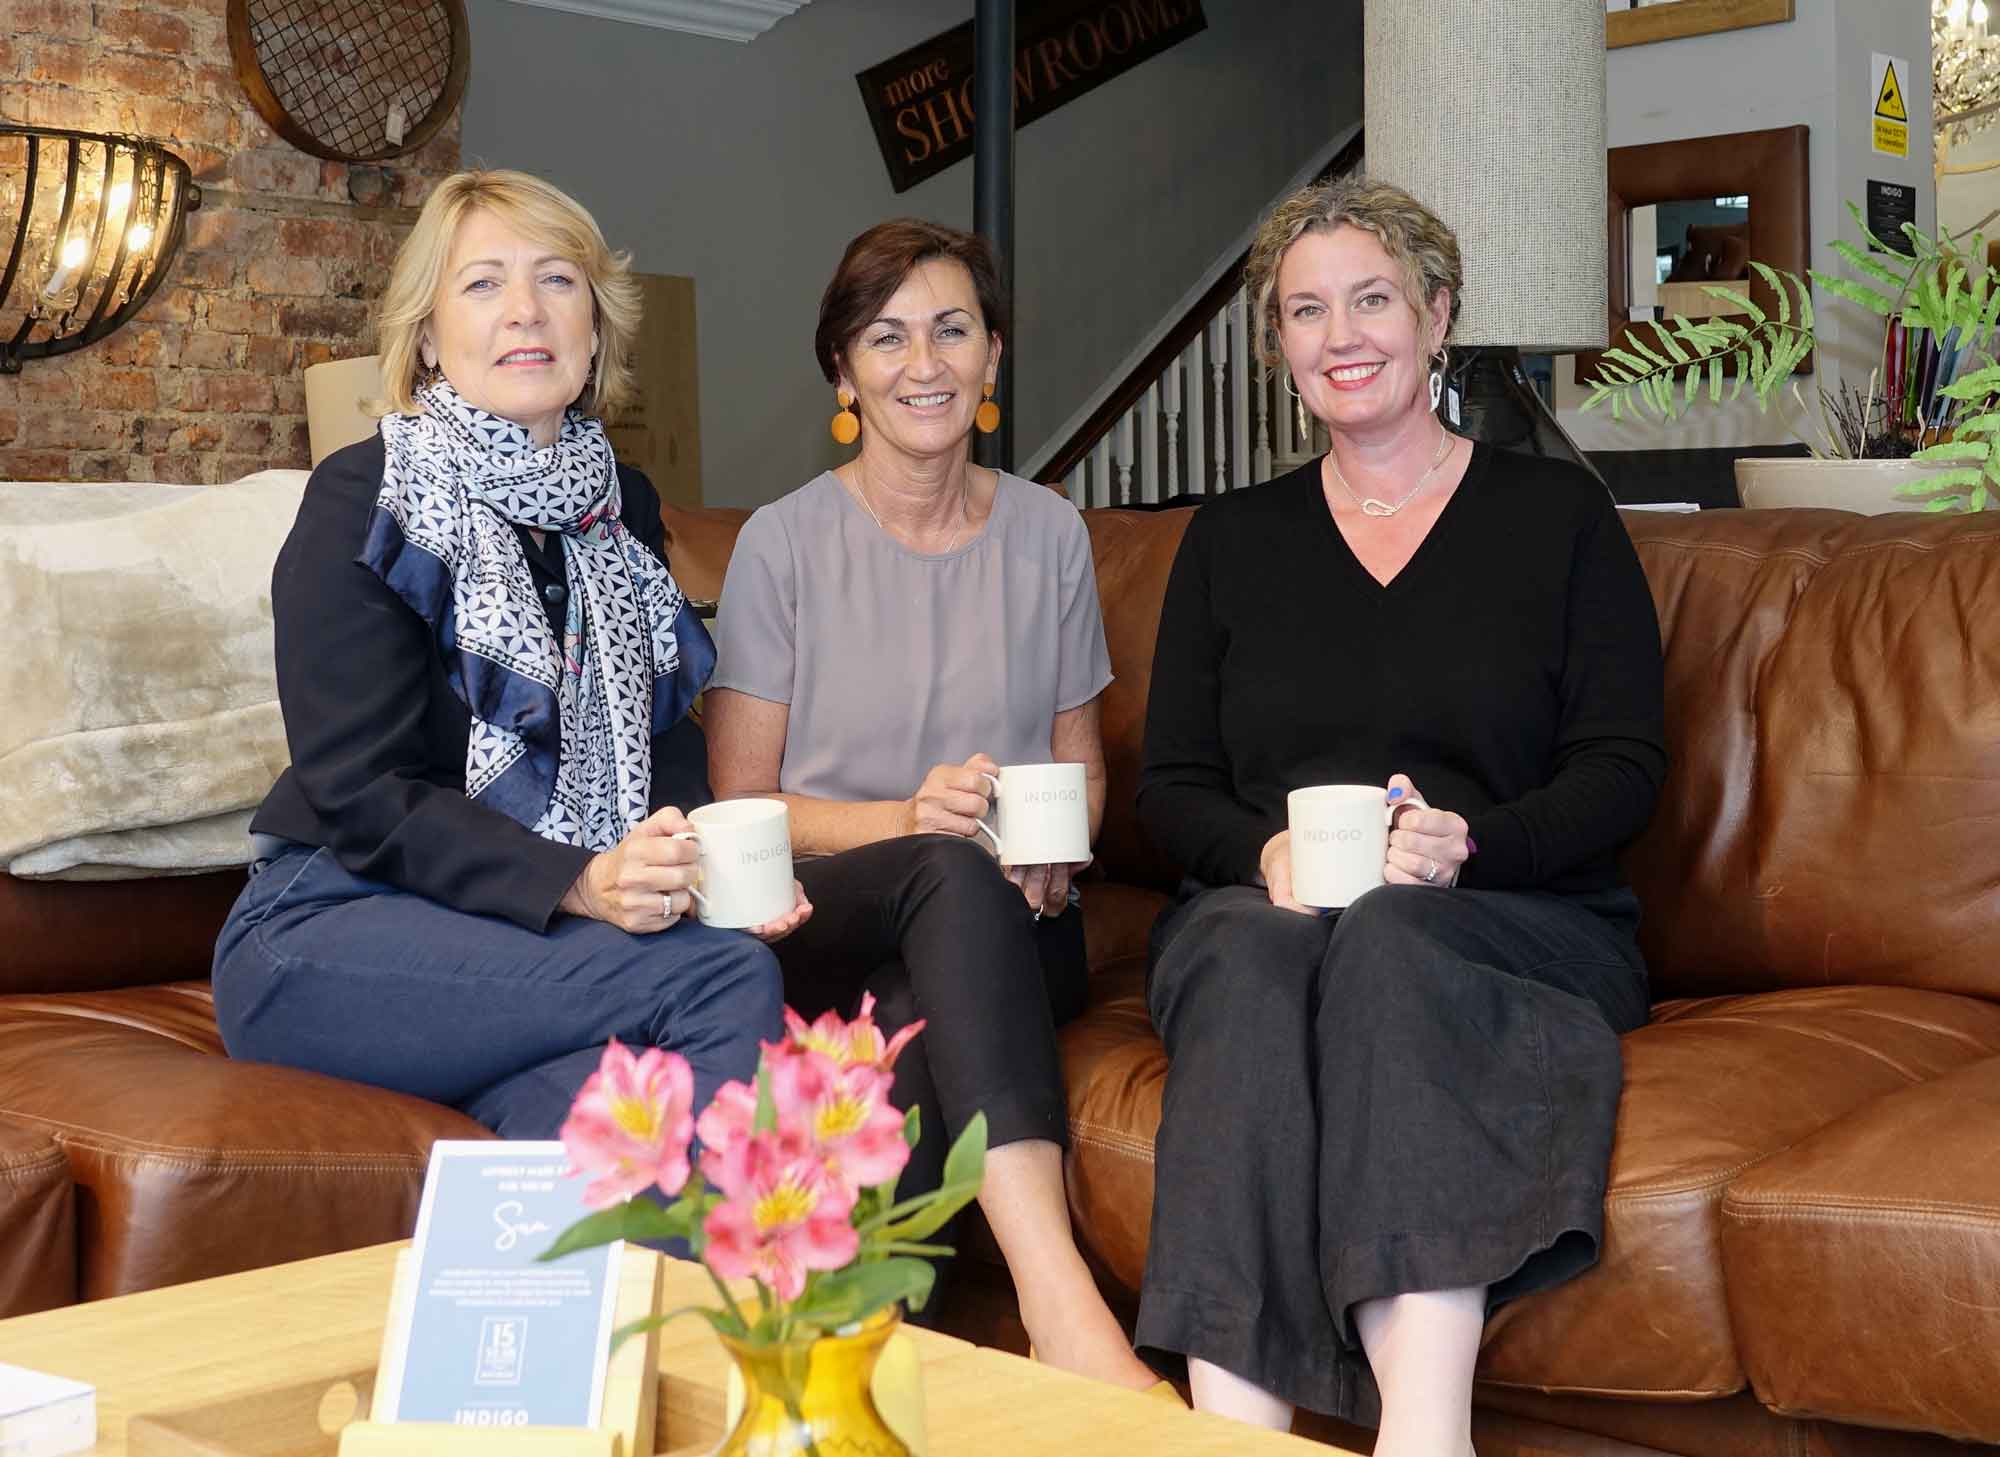 Welcome to the Club! Pictured from left are Christine Armstrong, Harrogate BID; Tracy Eckart, Indigo Furniture; and Lis Robinson, Harrogate BID